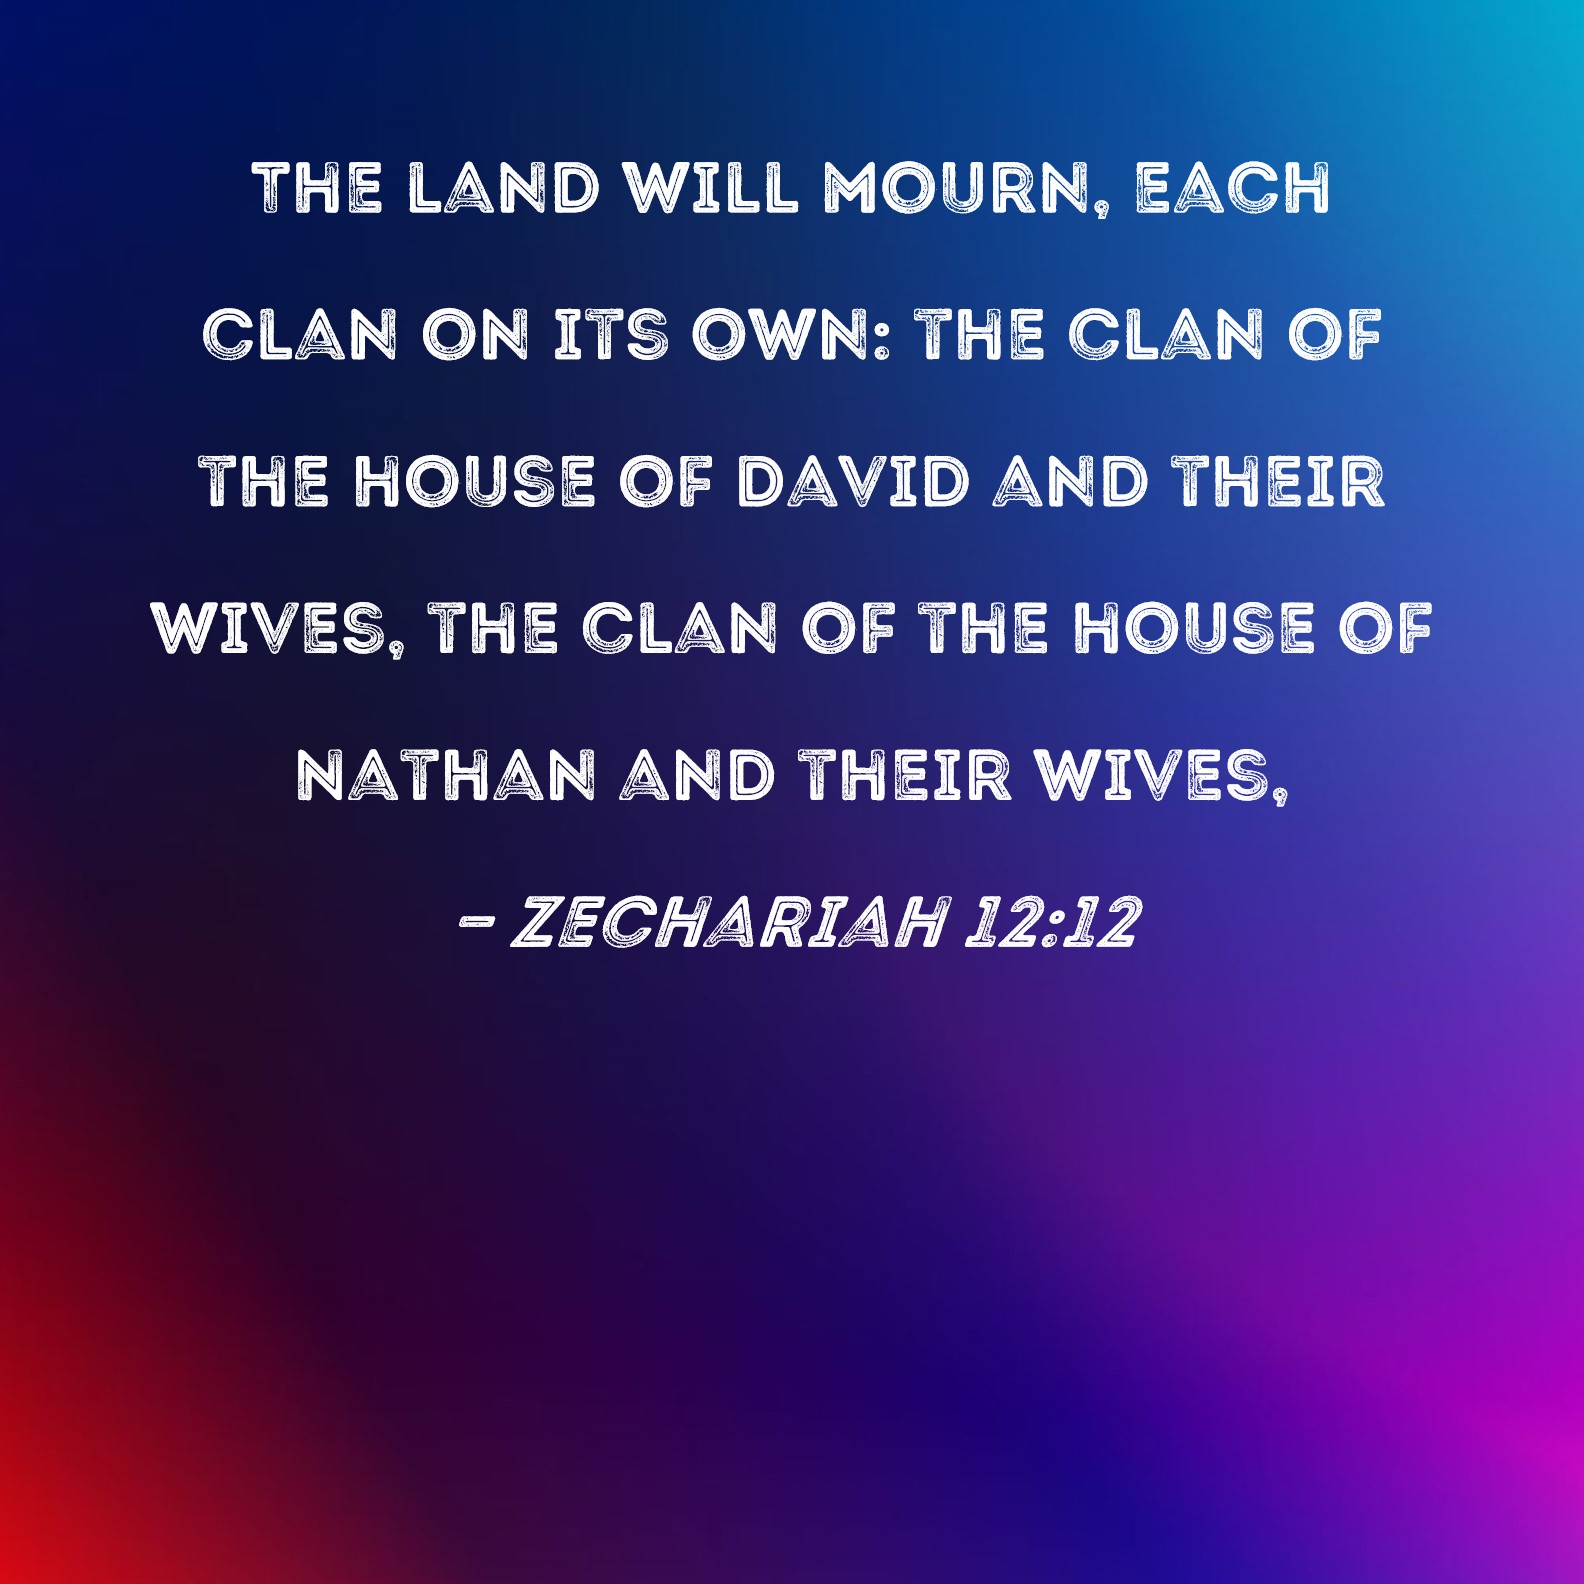 Zechariah 12:12 The land will mourn, each clan on its own: the clan of the  house of David and their wives, the clan of the house of Nathan and their  wives